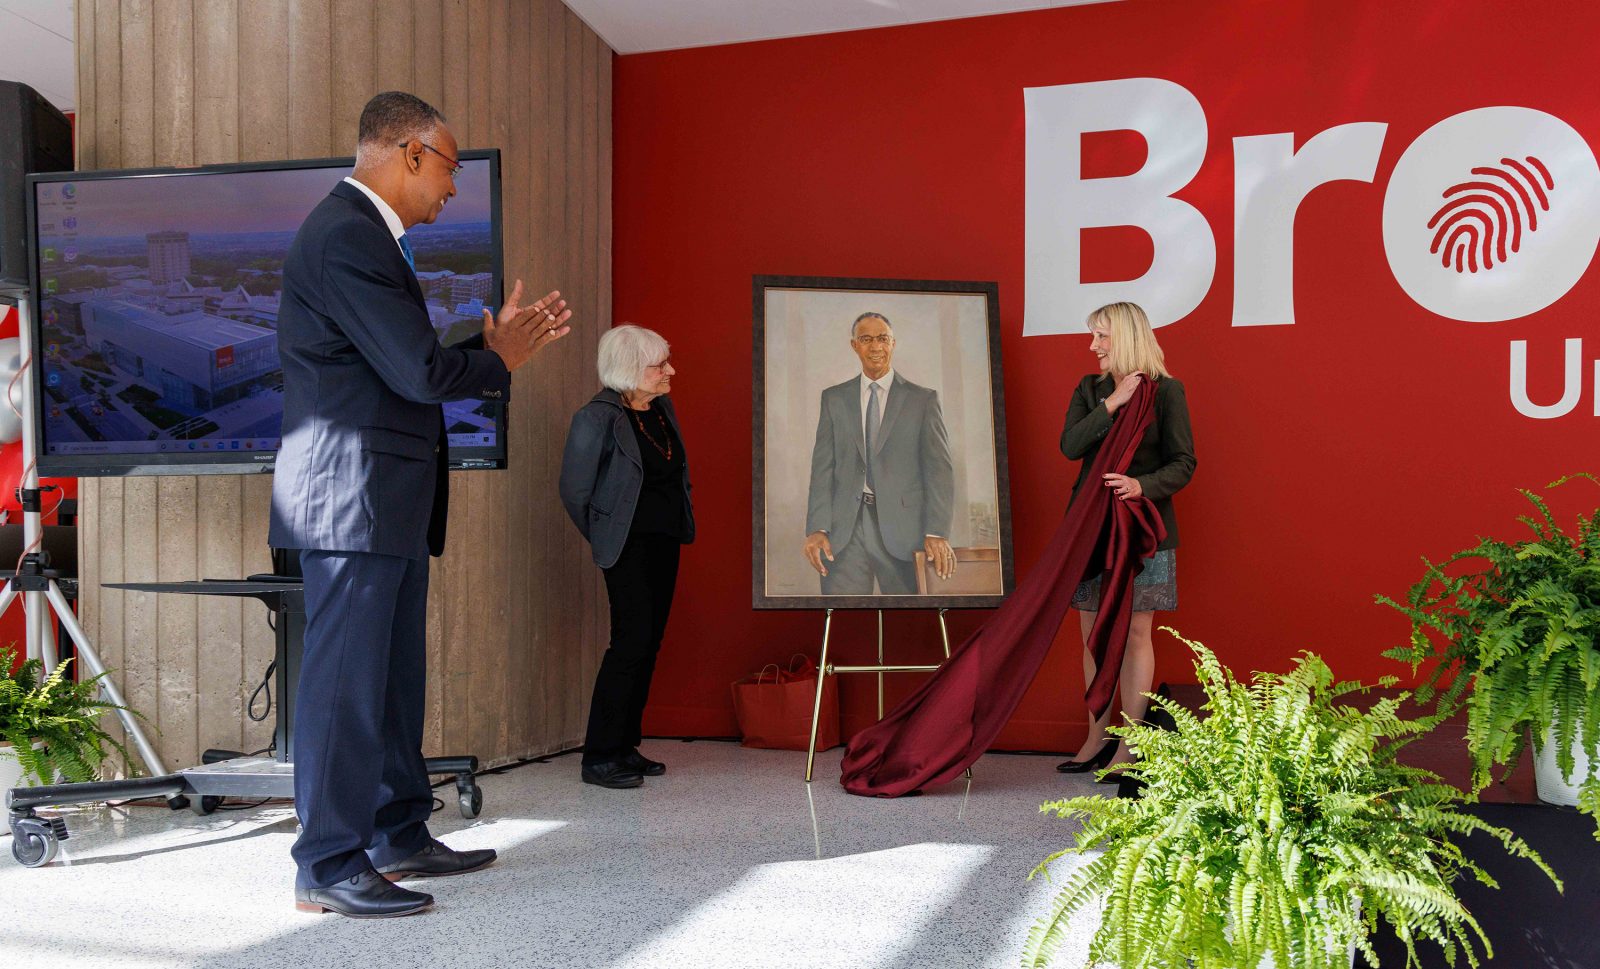 Three people unveil a painted portrait.